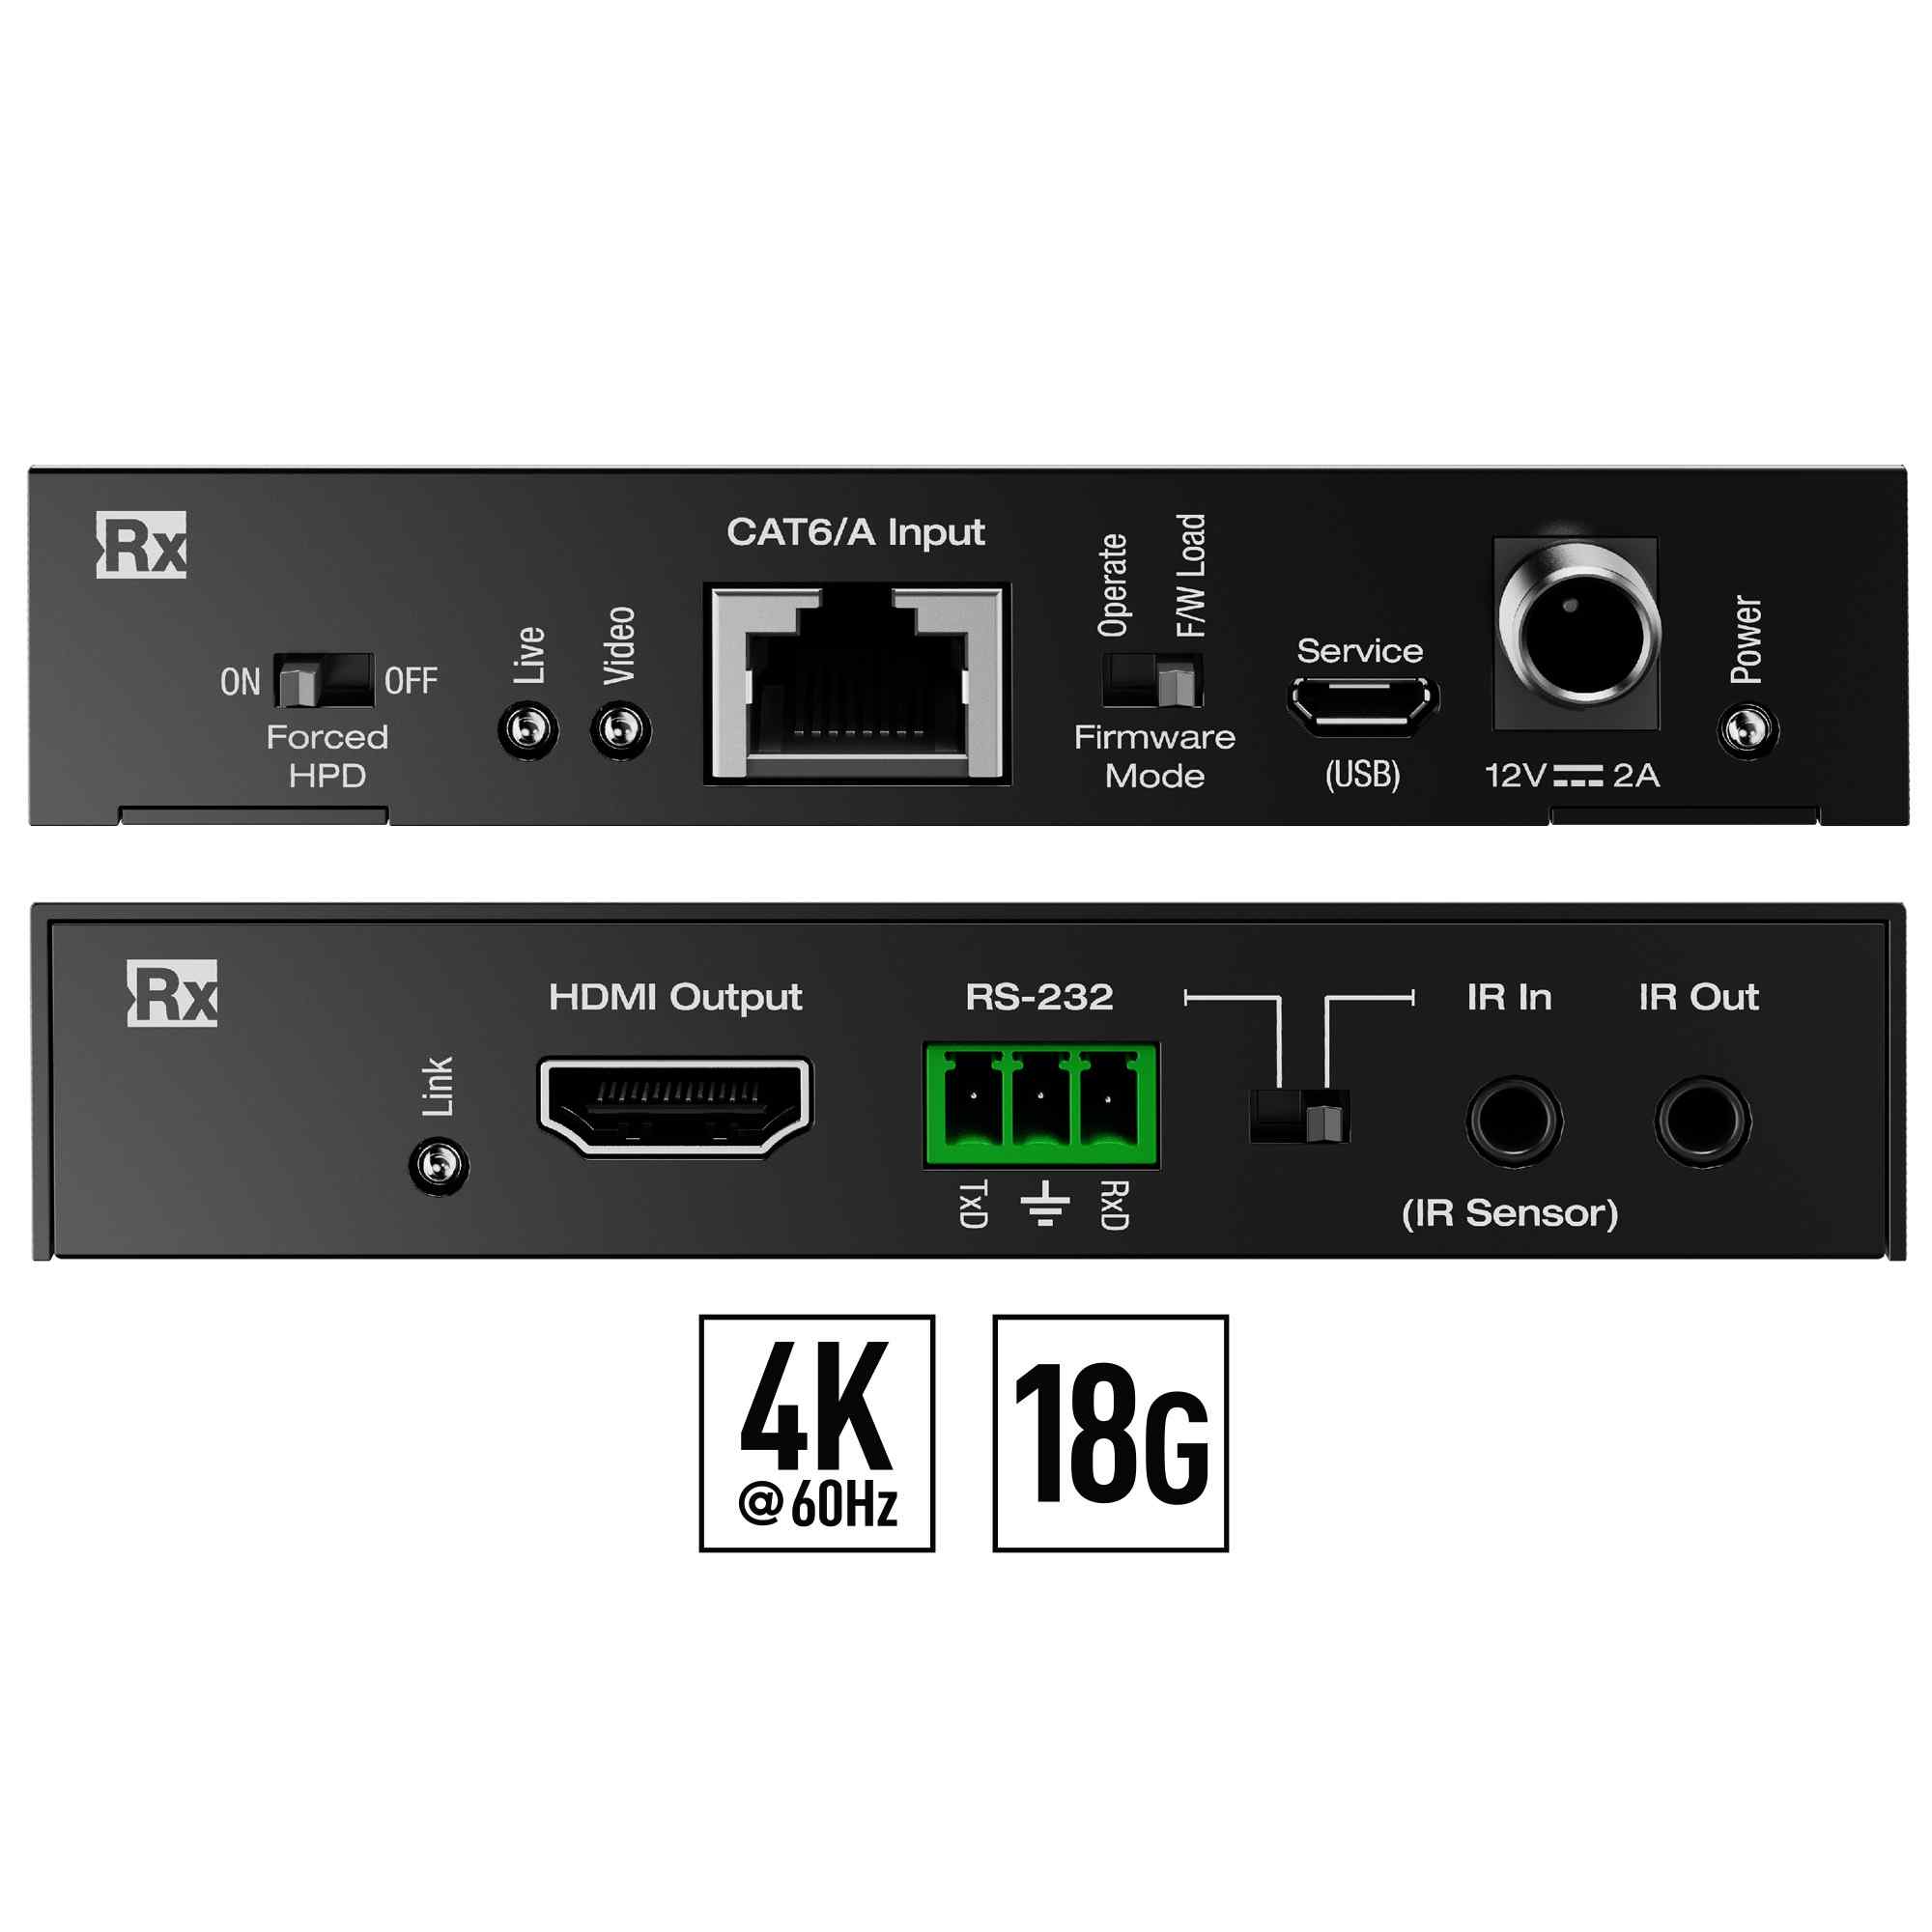 Thumbnail of hdmi extender 4k Rx front and rear